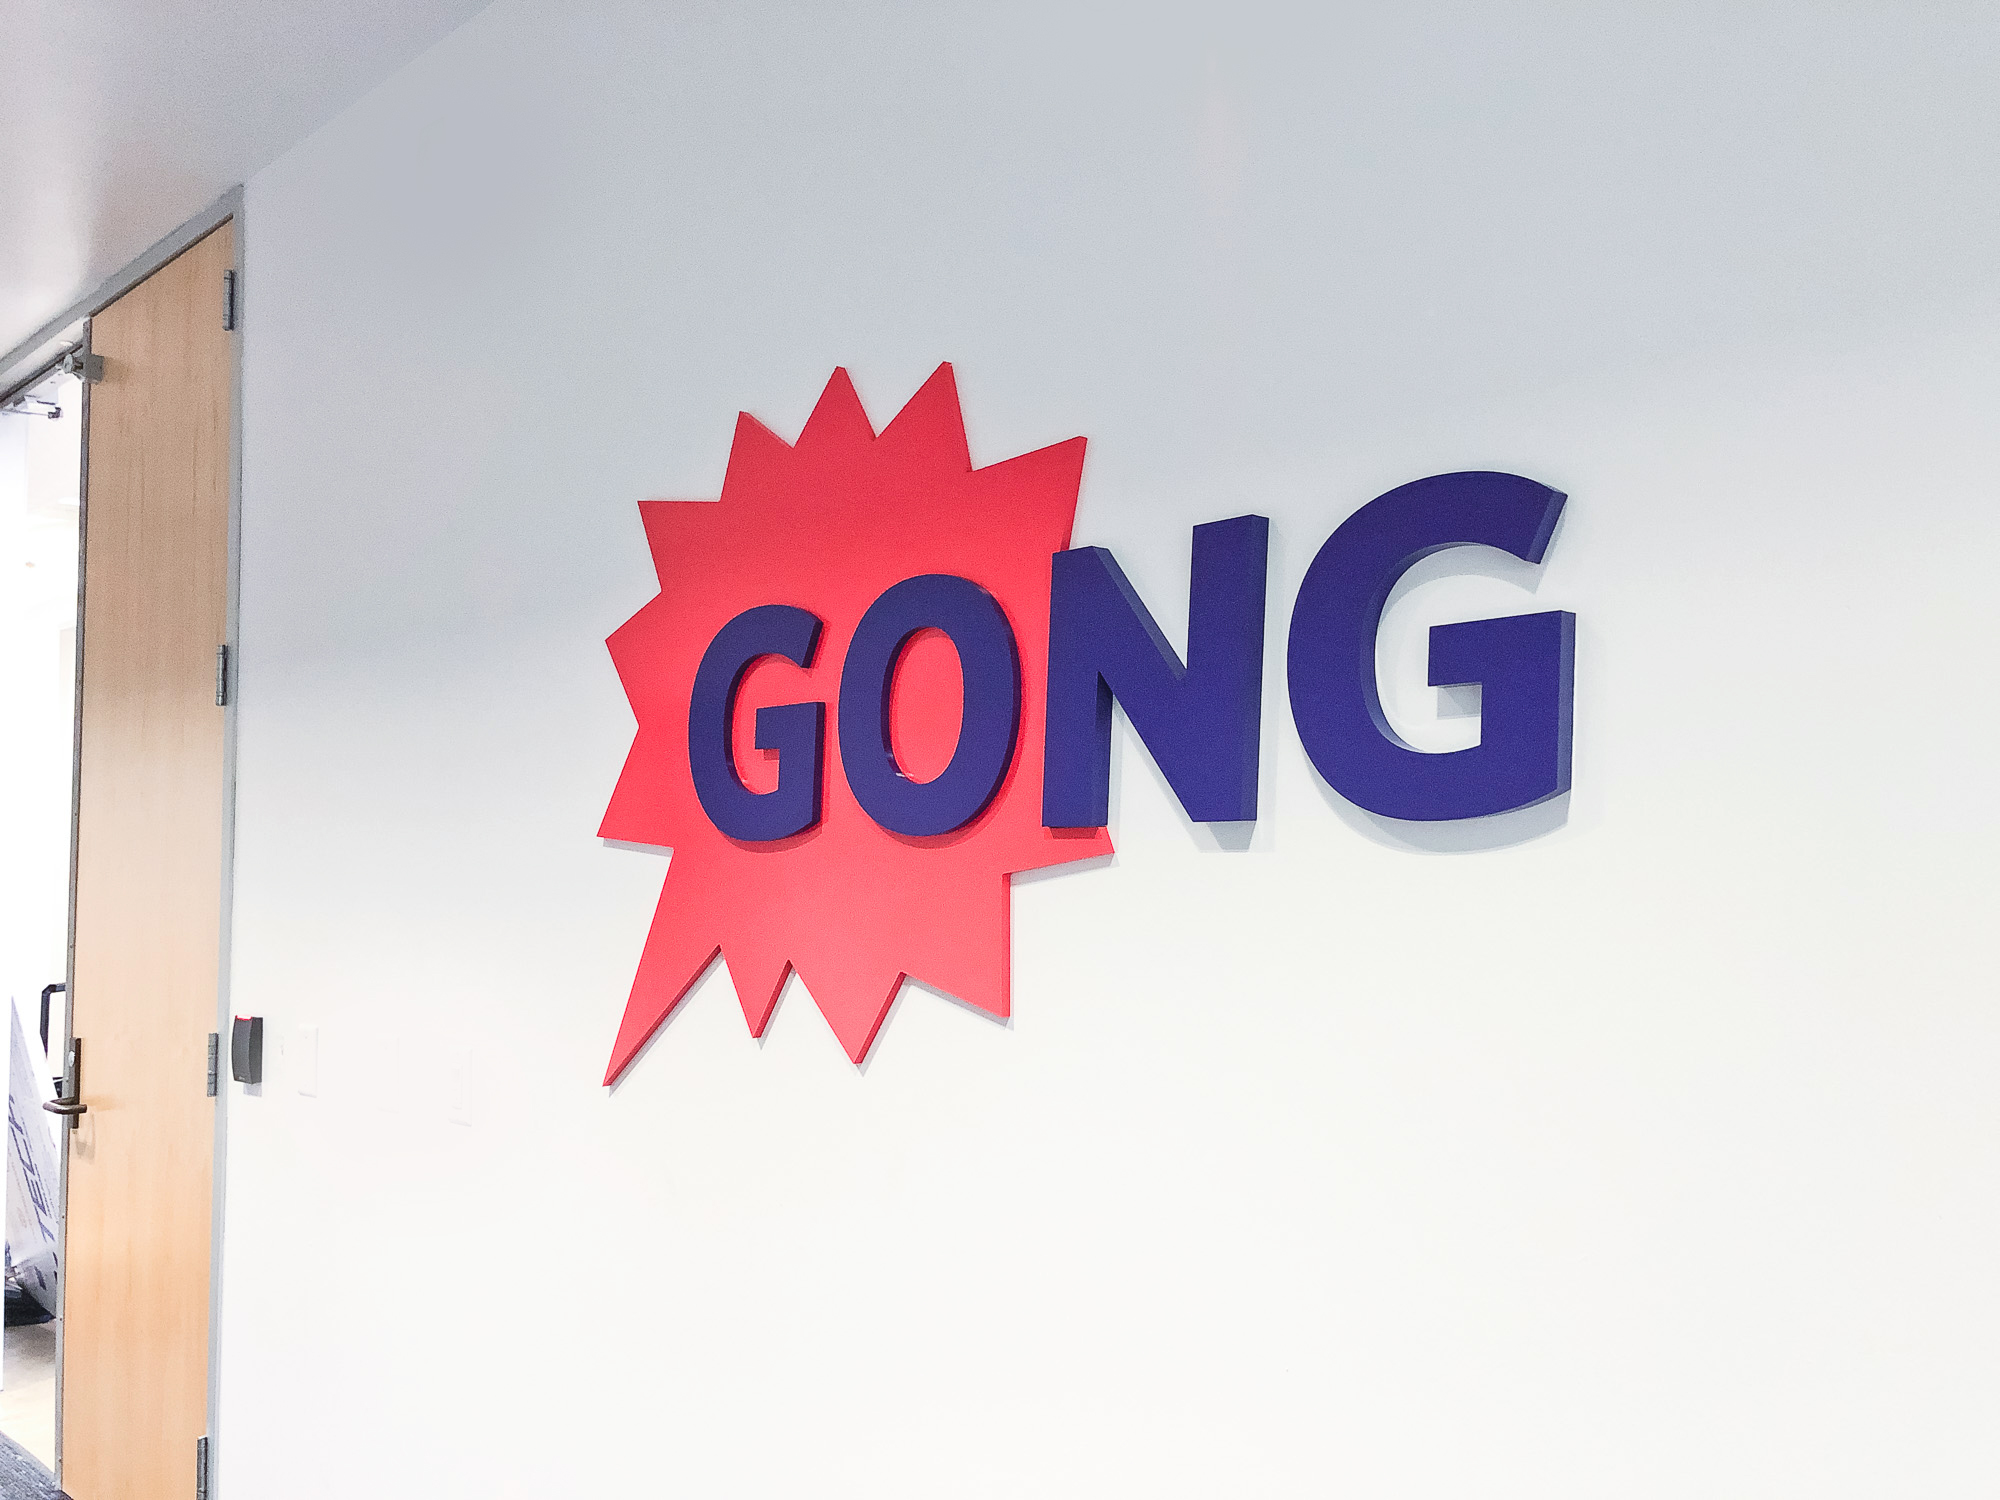 Red and purple painted sign for the San Francisco office of Gong, makers of a conversation intelligence platform for sales.